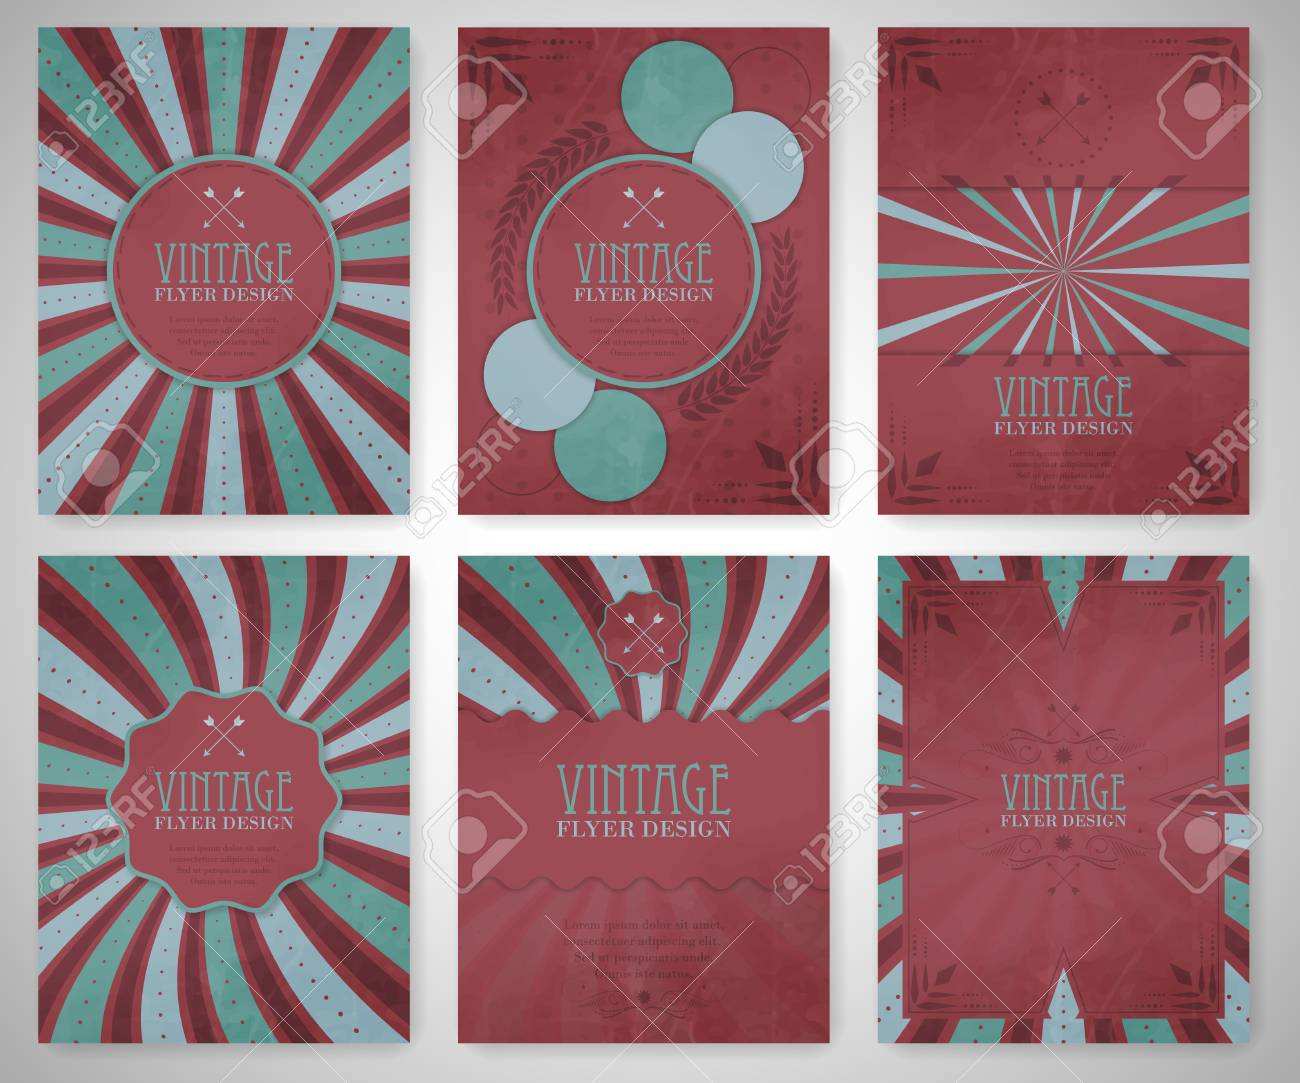 60 Free Printable Vintage Flyer Template Photo by Vintage Flyer Template